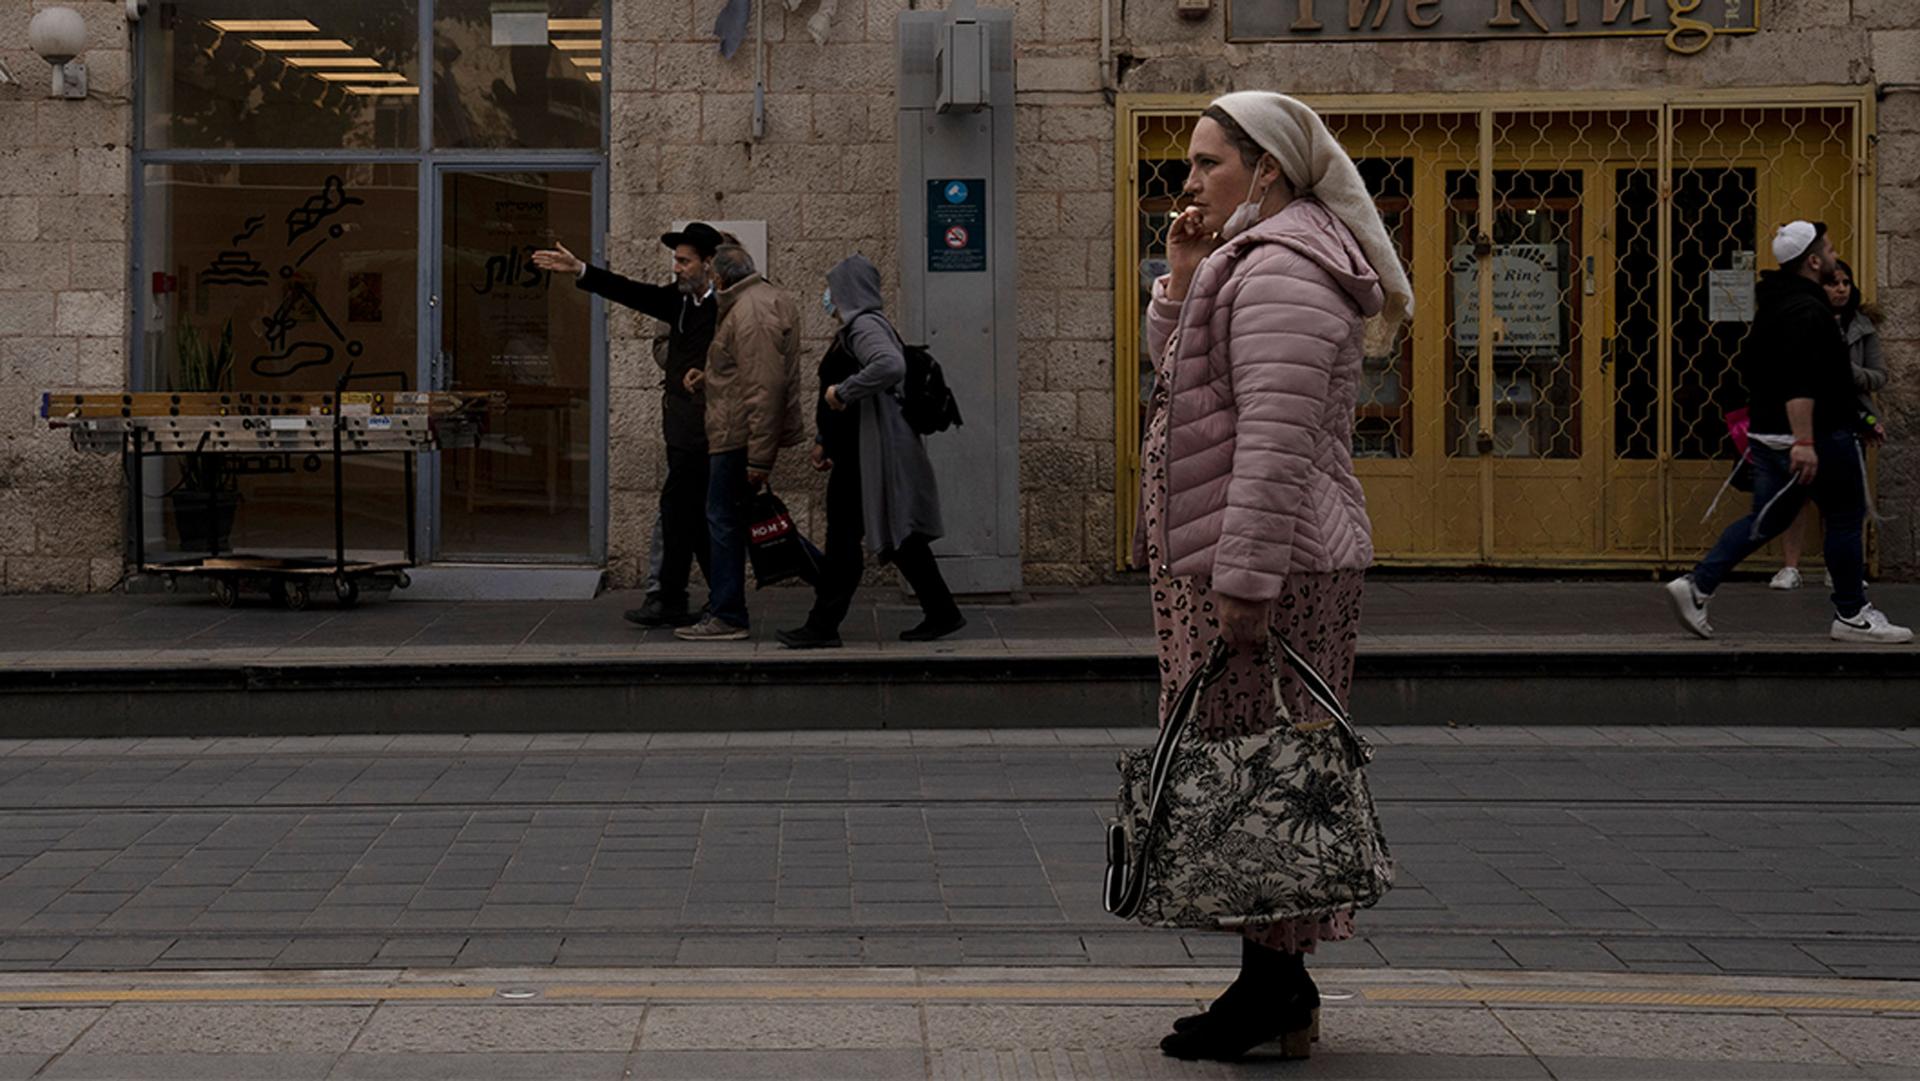 A woman speaks on her mobile phone while waiting for a light rail train, wearing a mask on her chin that she'll be required to pull over her nose and mouth on the train to help curb the spread of the coronavirus, in central Jerusalem.